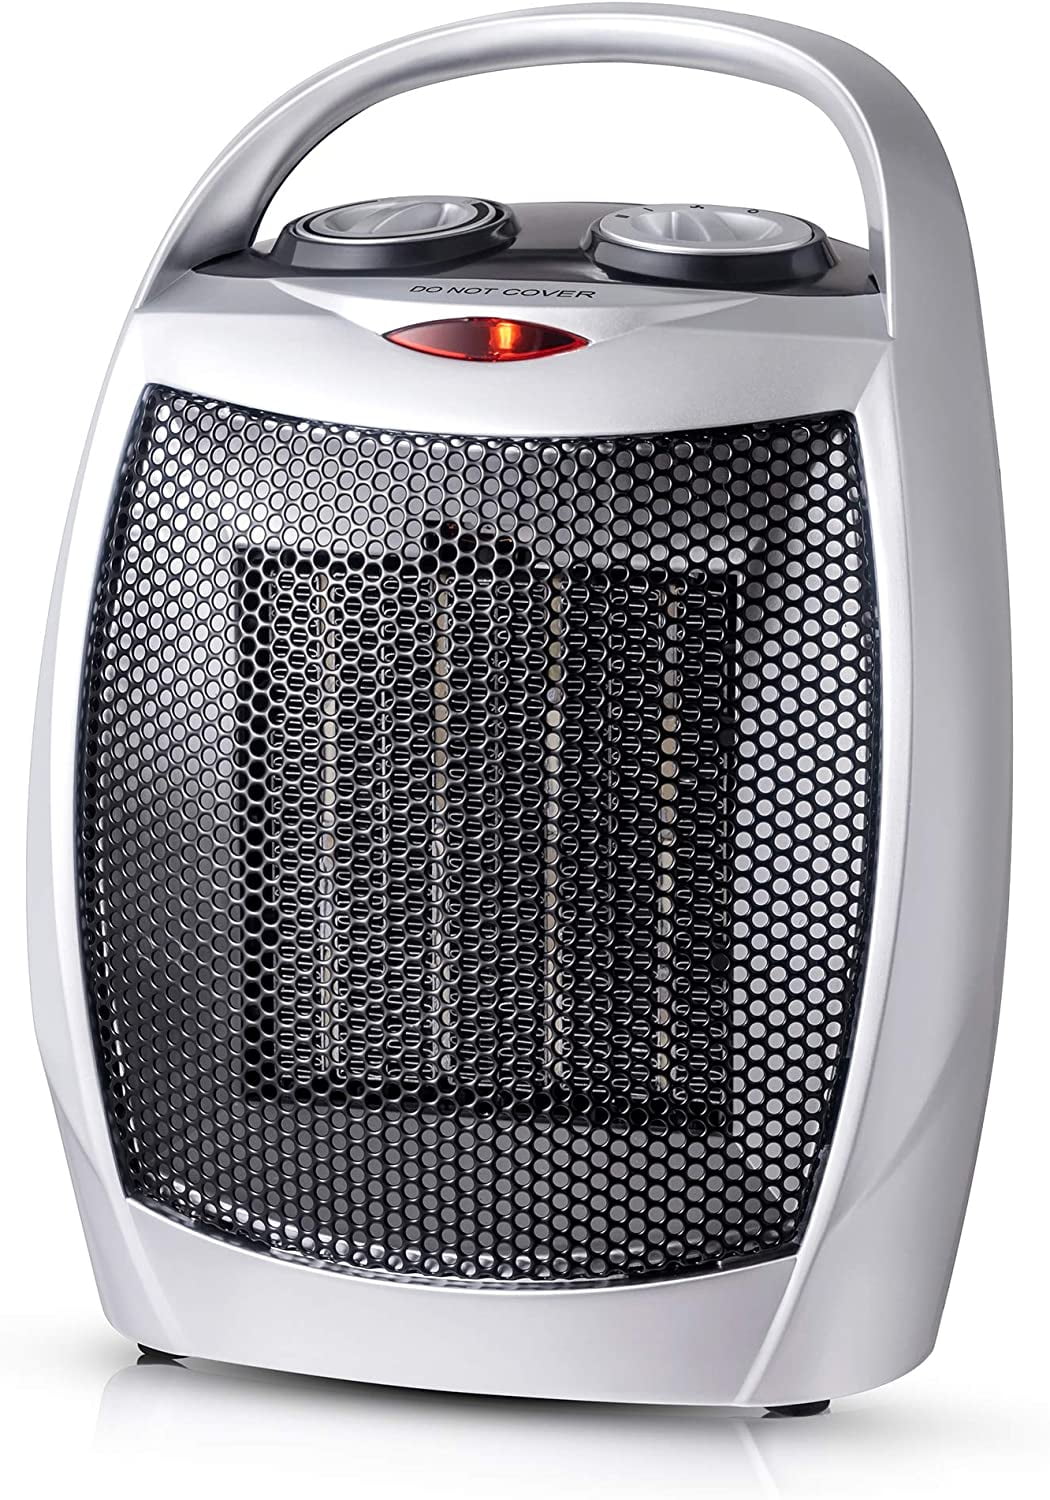 Ceramic Space Heater 750W//1500W Portable Desk Small Quiet Fast Heating Fan with Adjustable Thermosta for Office Desktop and Home Electric Heater